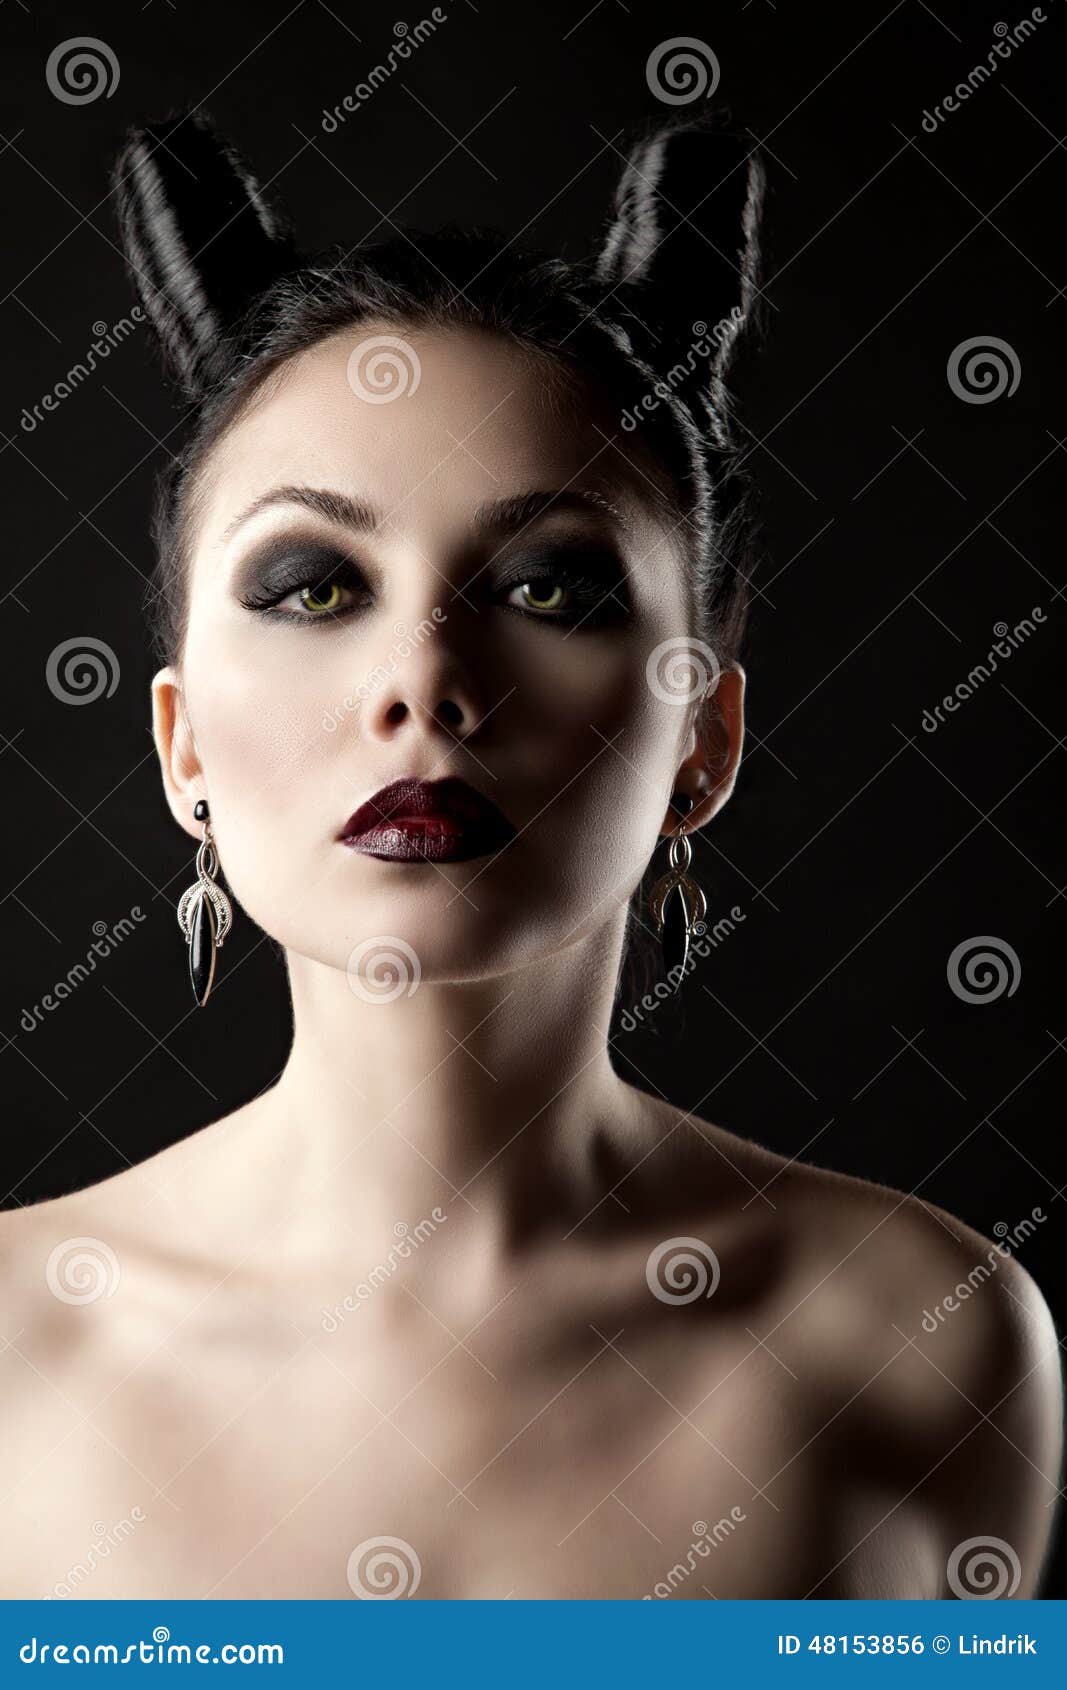 Demon-tempter stock photo. Image of ideal, female, hairstyle - 48153856